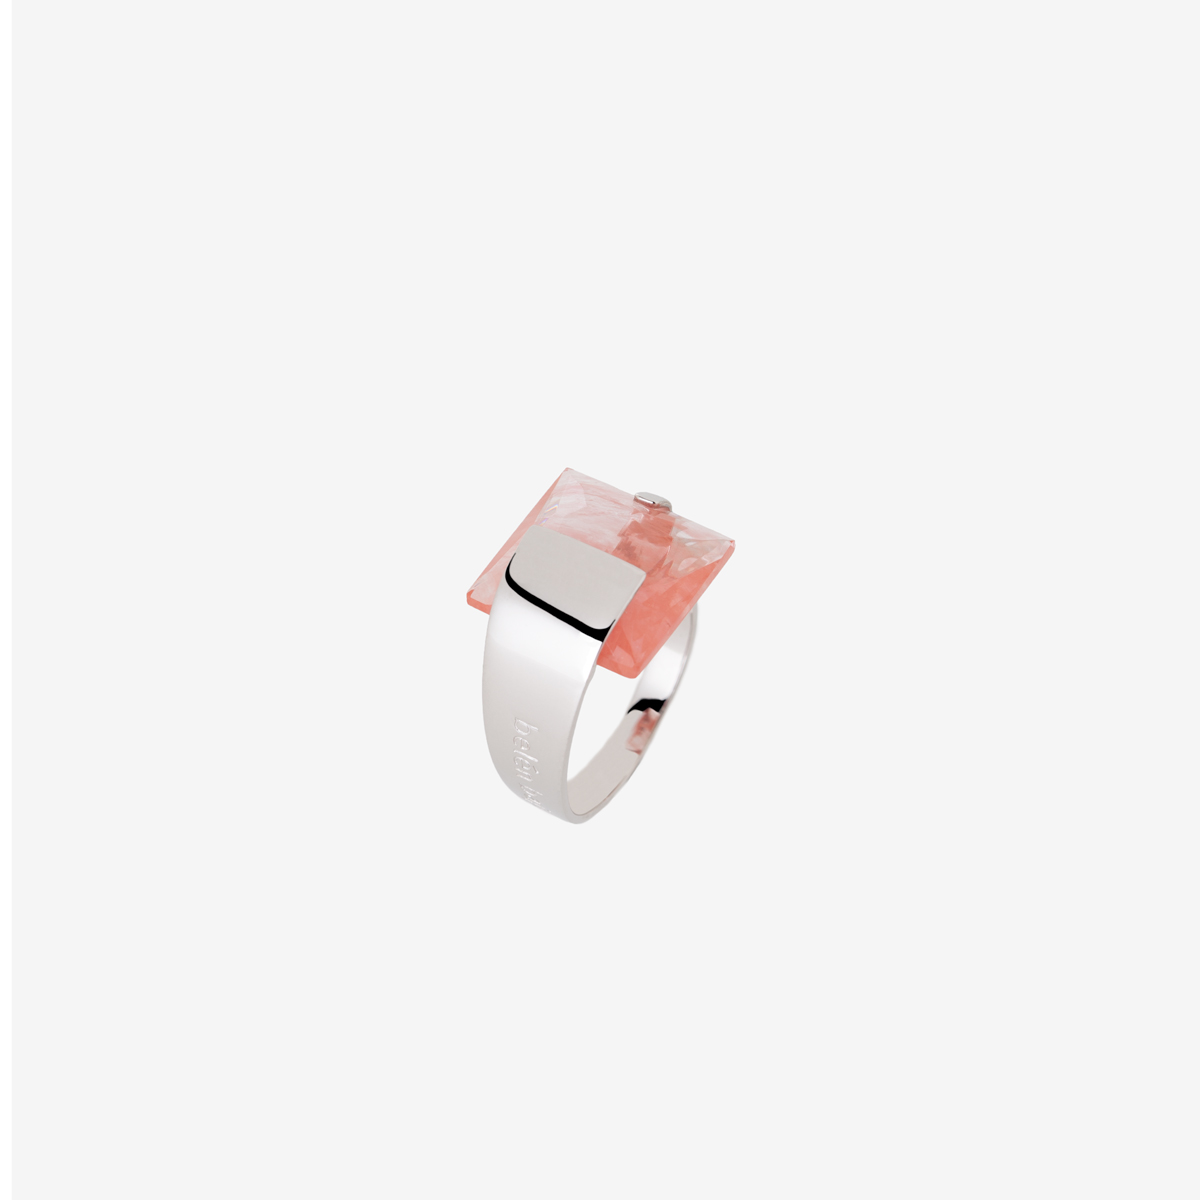 handcrafted Bim ring in sterling silver and strawberry quartz designed by Belen Bajo